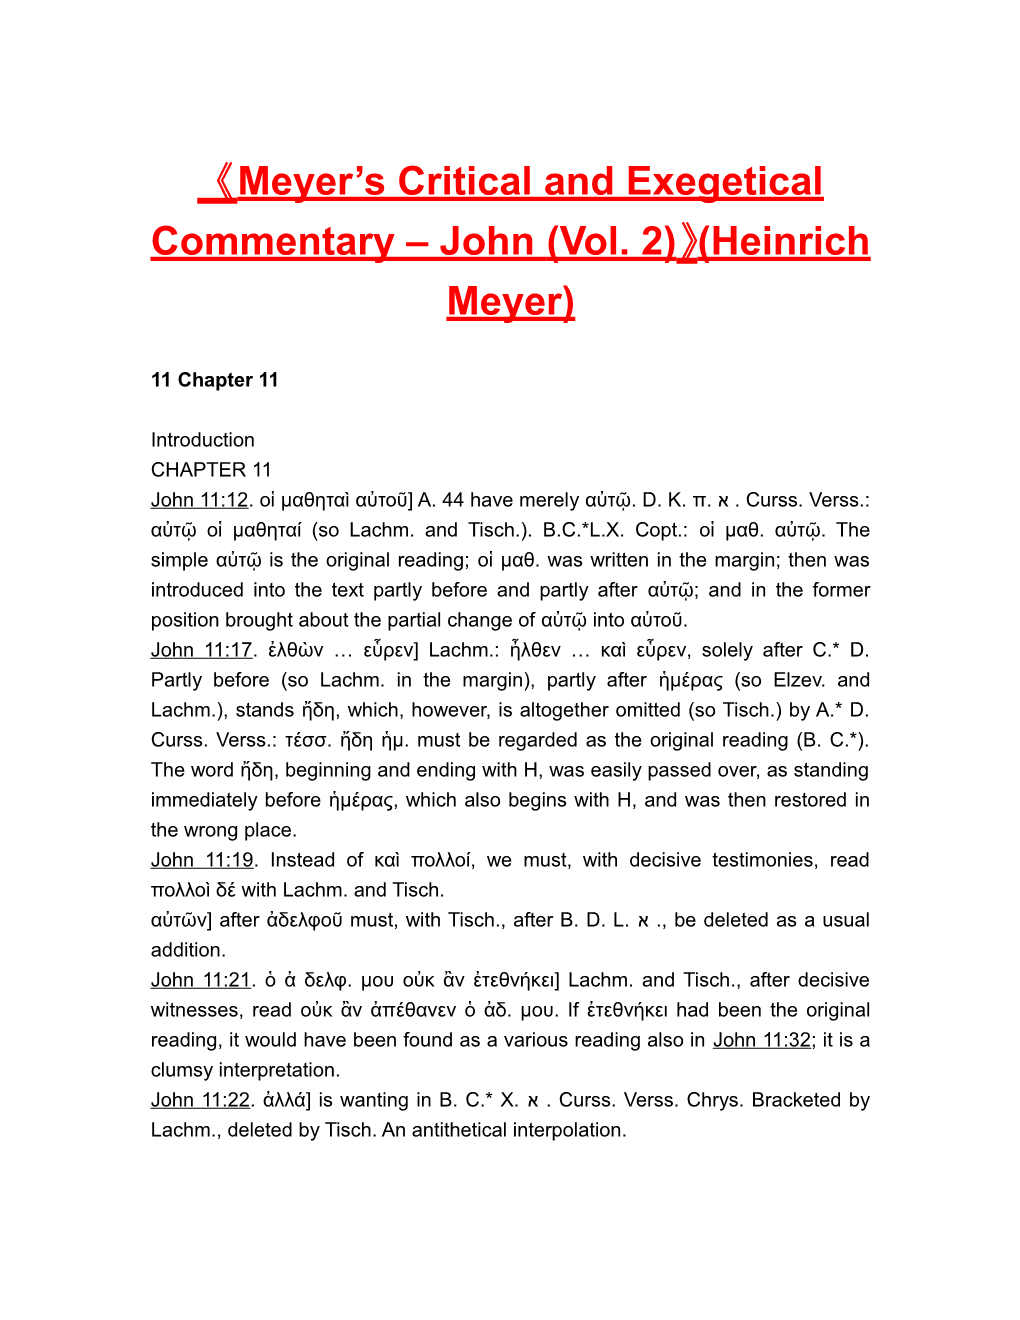 Meyer S Critical and Exegetical Commentary John (Vol. 2) (Heinrich Meyer)